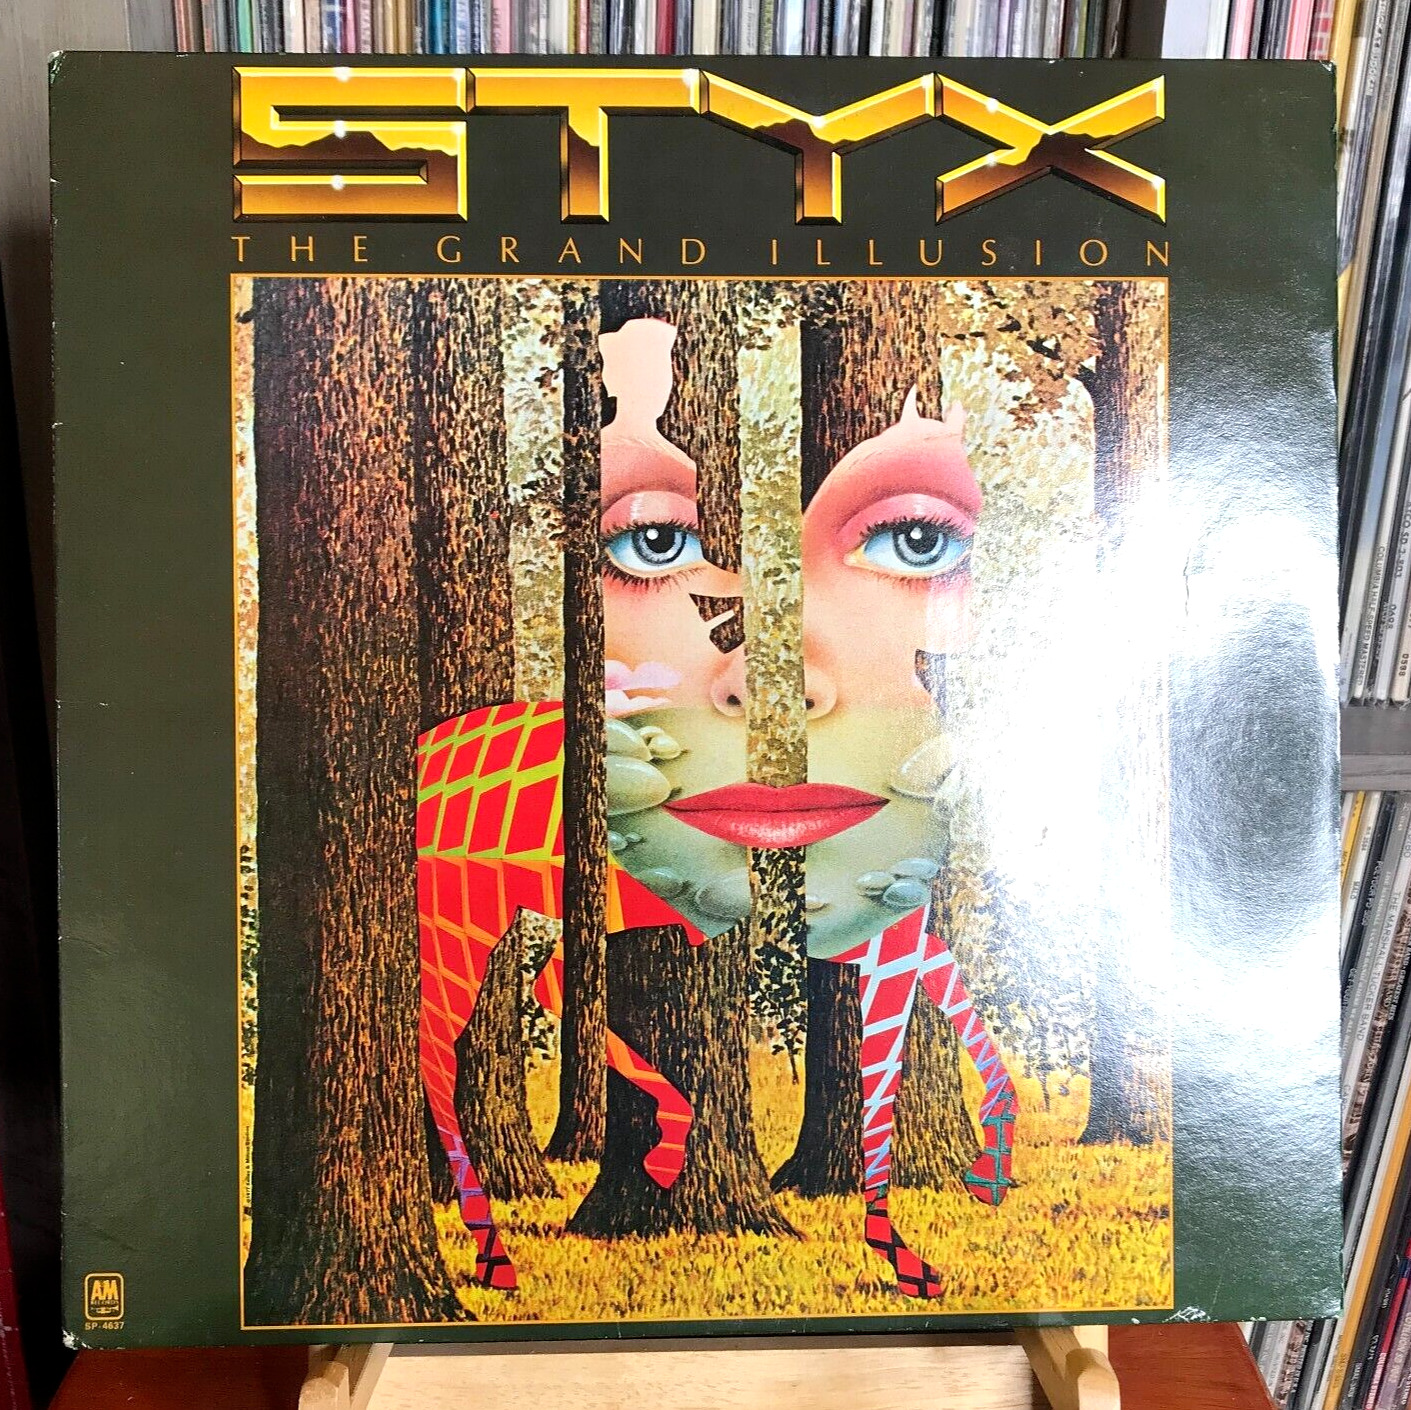 Tested:  Styx – The Grand Illusion - 1977 A&M Records Classic Rock LP w/ Poster